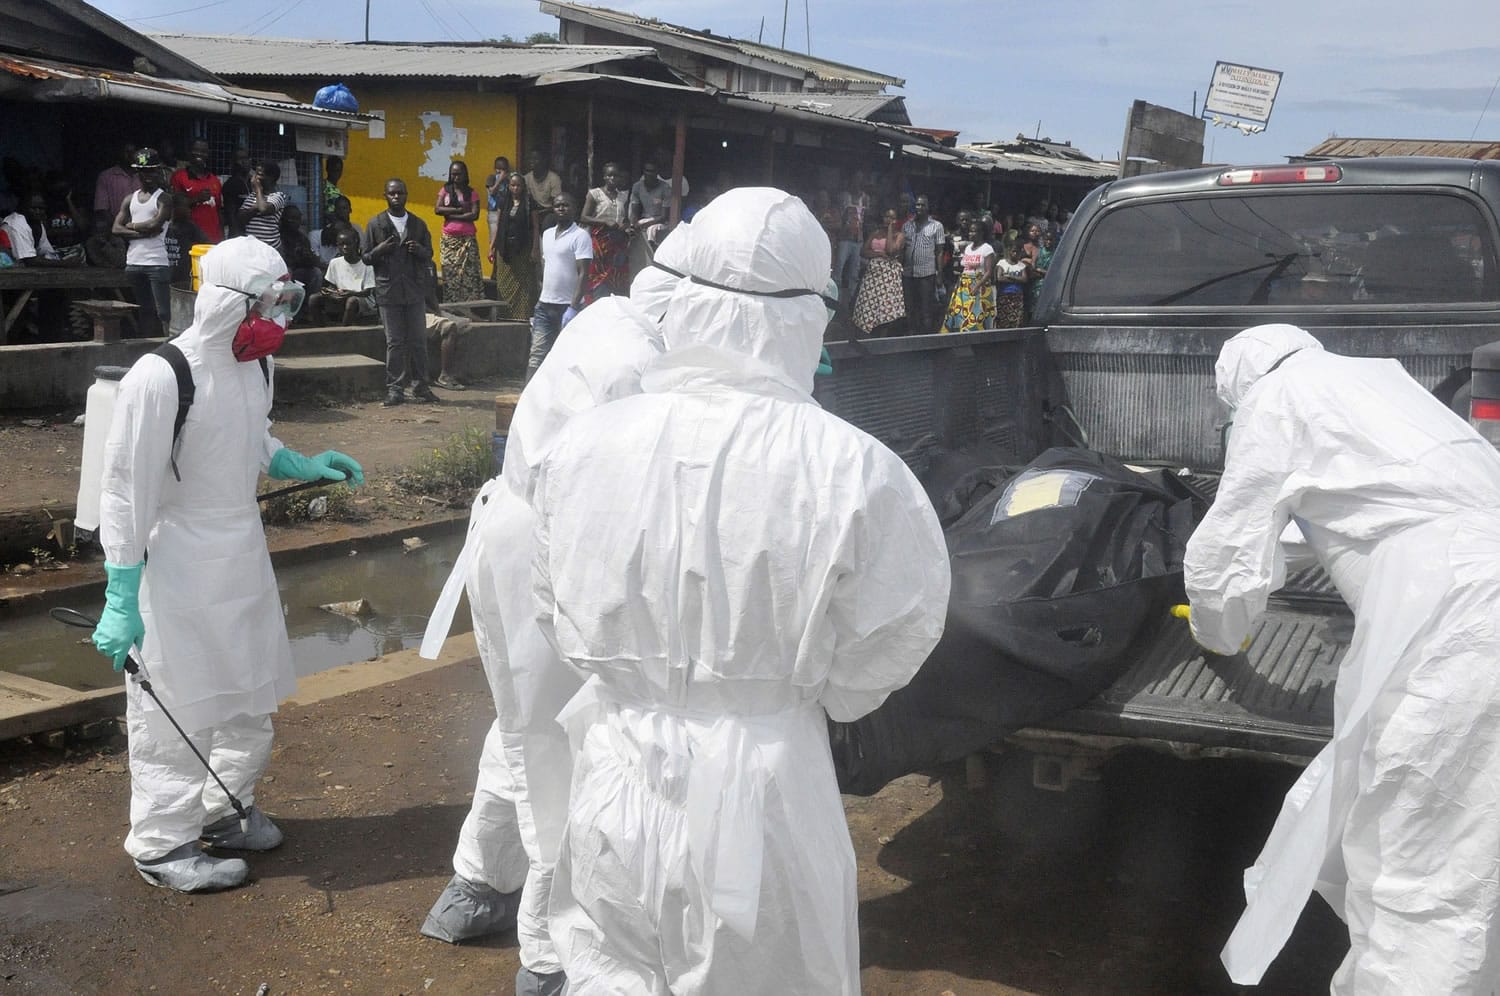 Health workers in protective gear load the body of a woman suspected of dying from the Ebola virus, into a pickup truck near the area of Freeport in Monrovia, Liberia, on Wednesday.